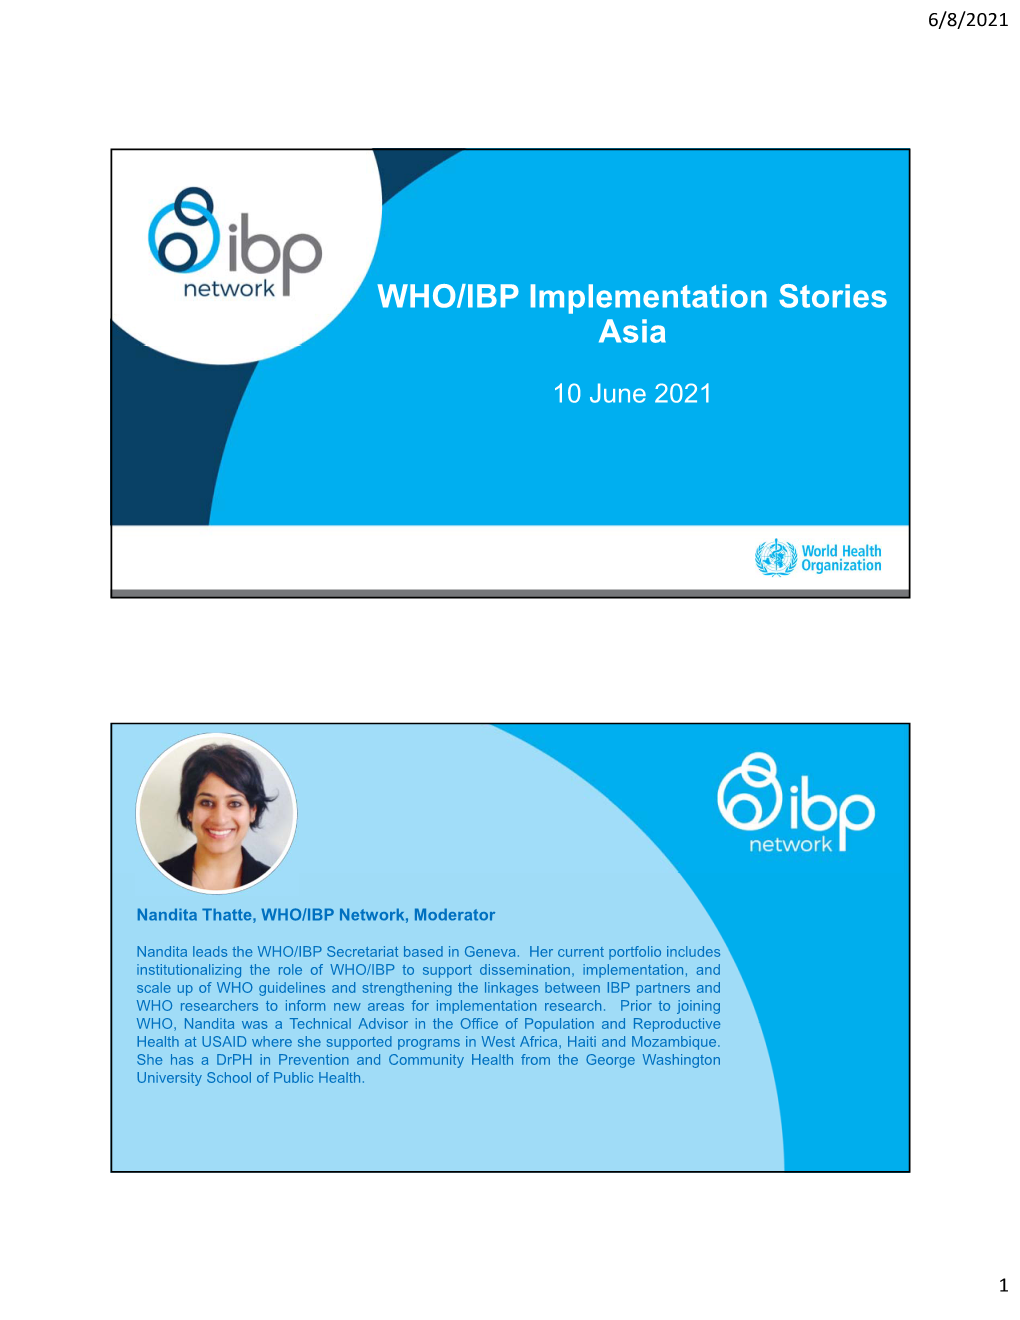 WHO/IBP Implementation Stories Asia